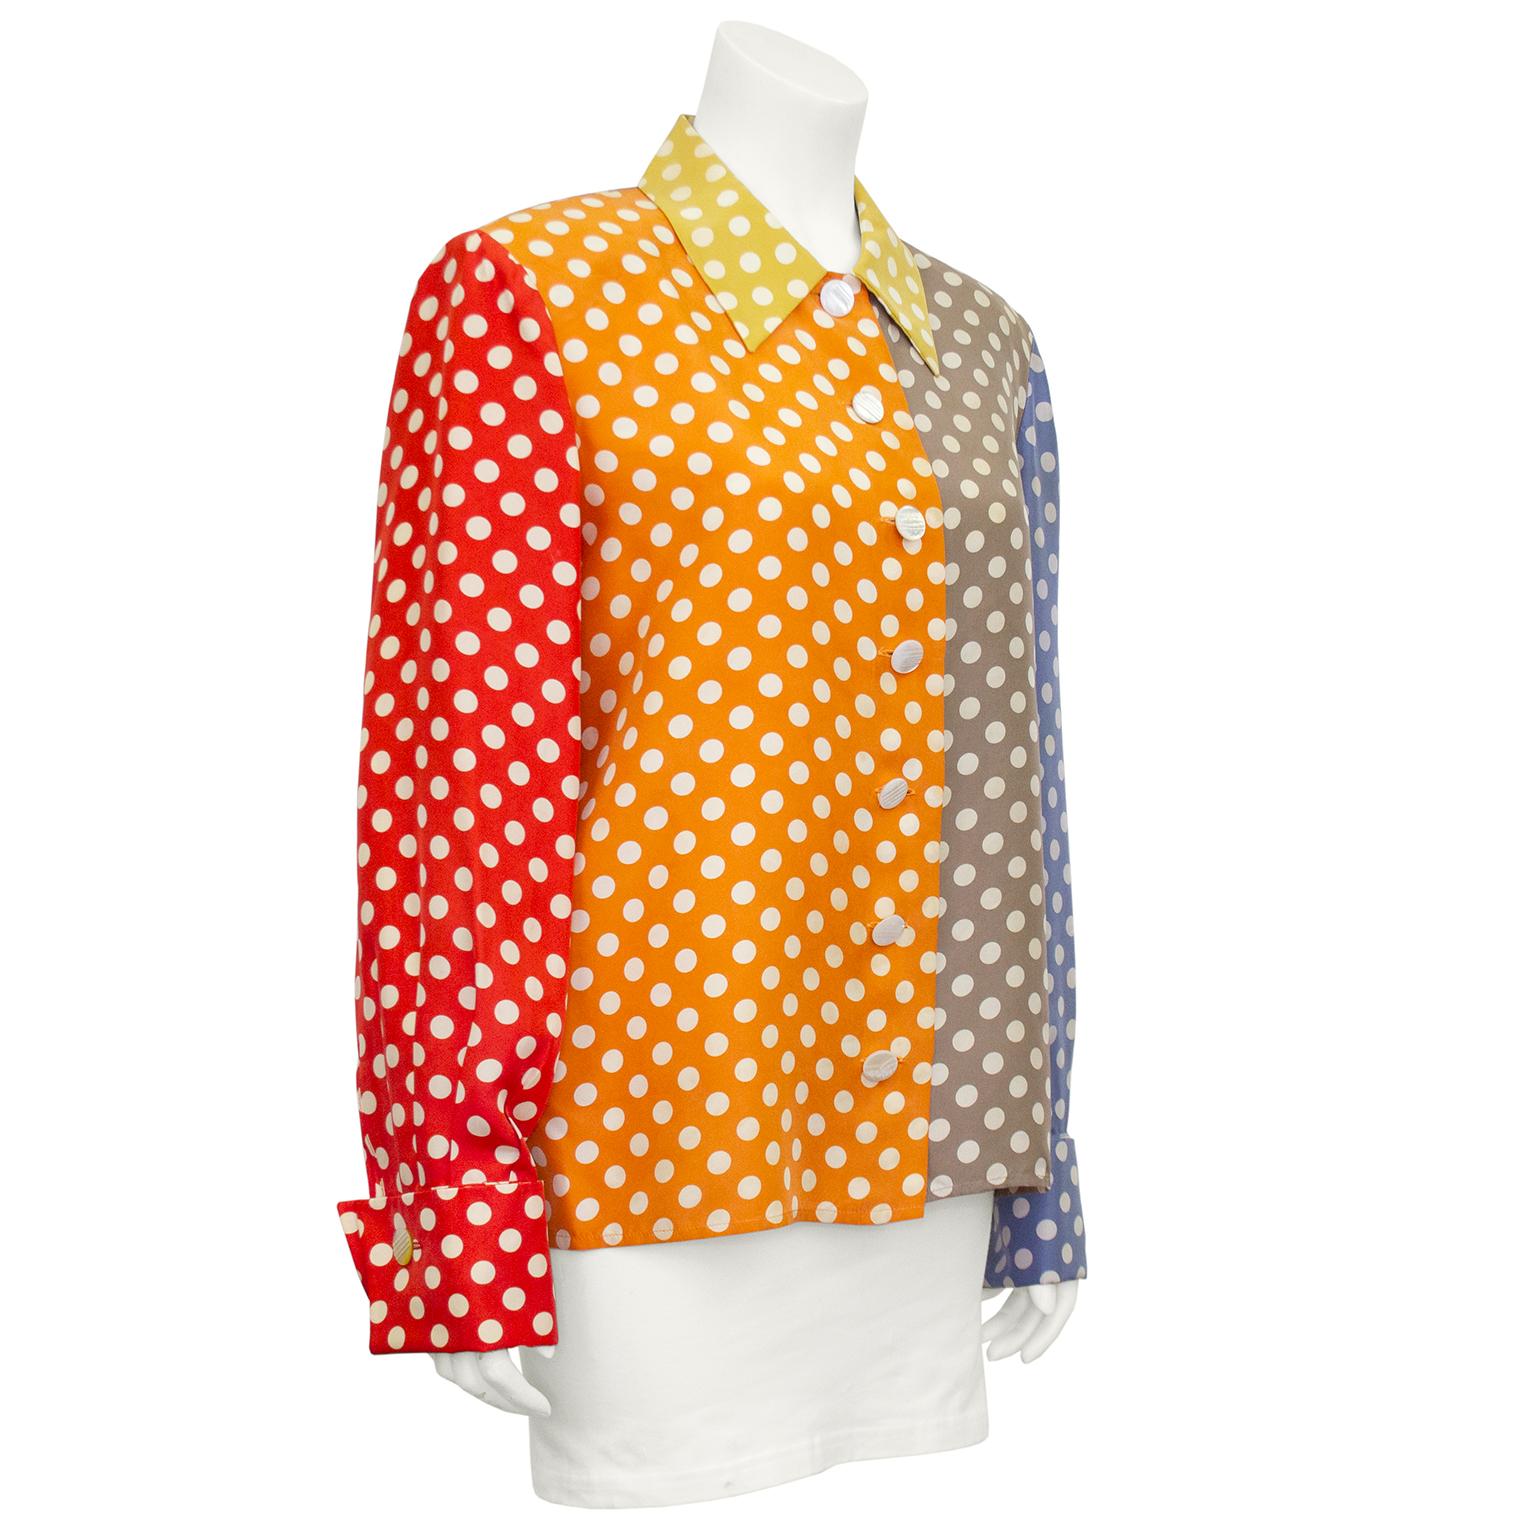 Cute and fun 1980s Valentino silk shirt. Colour blocking - yellow collar and orange and grey through the body with one red and one pale blue sleeve. All over white polka dots. White Mother of Pearl round buttons that mimic the polka dots perfectly.